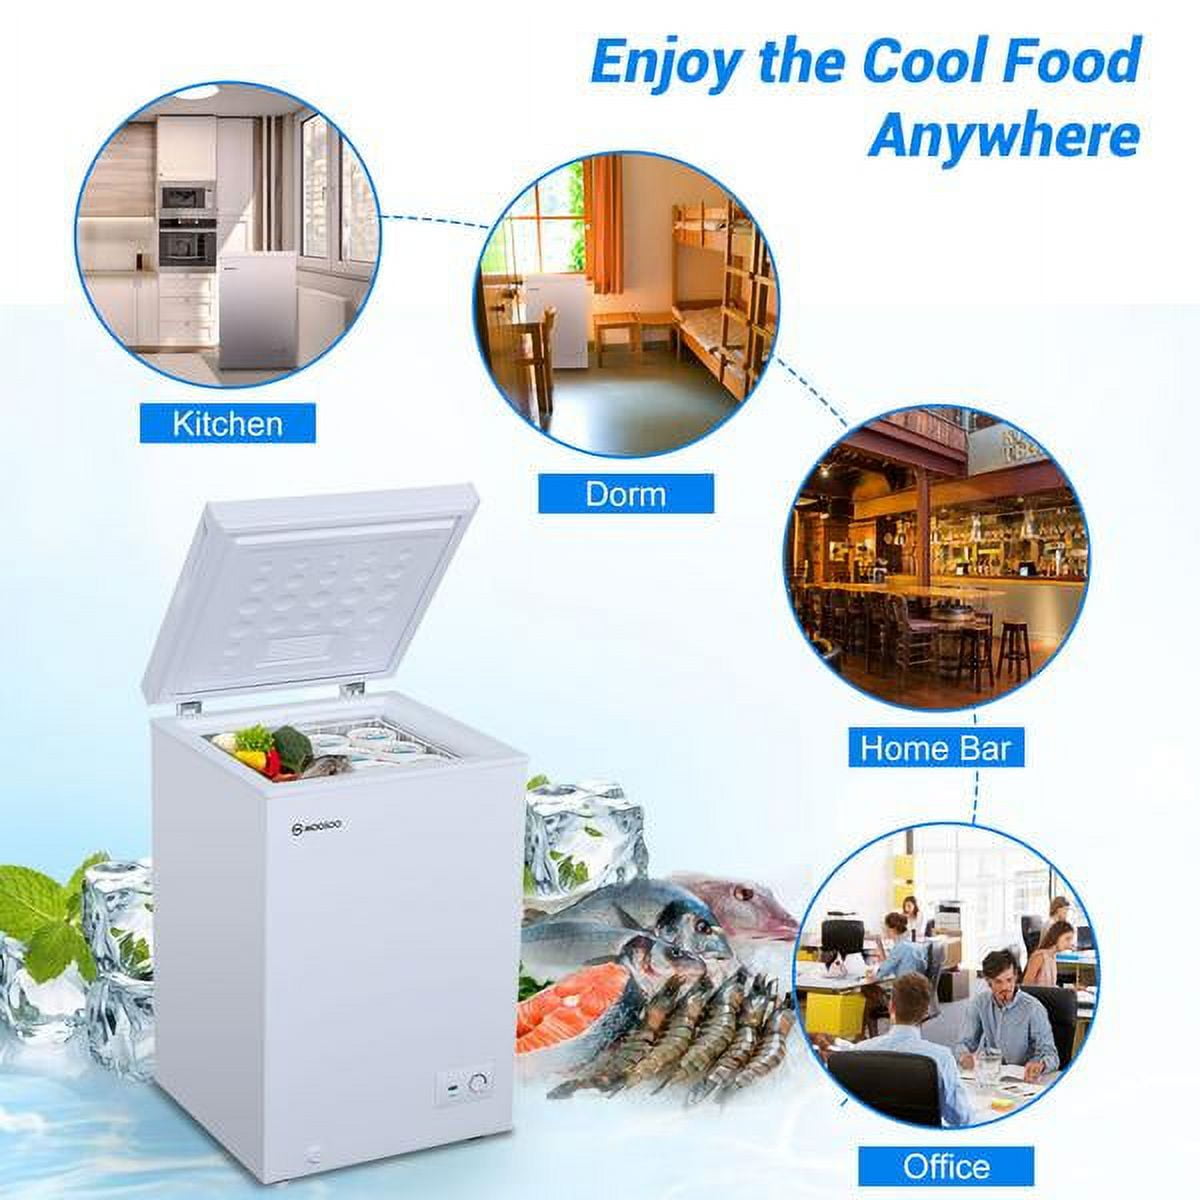 Chest Freezer MOOSOO 7.0 Cu ft Deep Freezer Chest Freezer Energy Saving  Low-Noise X002QHJA3T, Local Pickup Only Save up to 40%, Outlet Sale